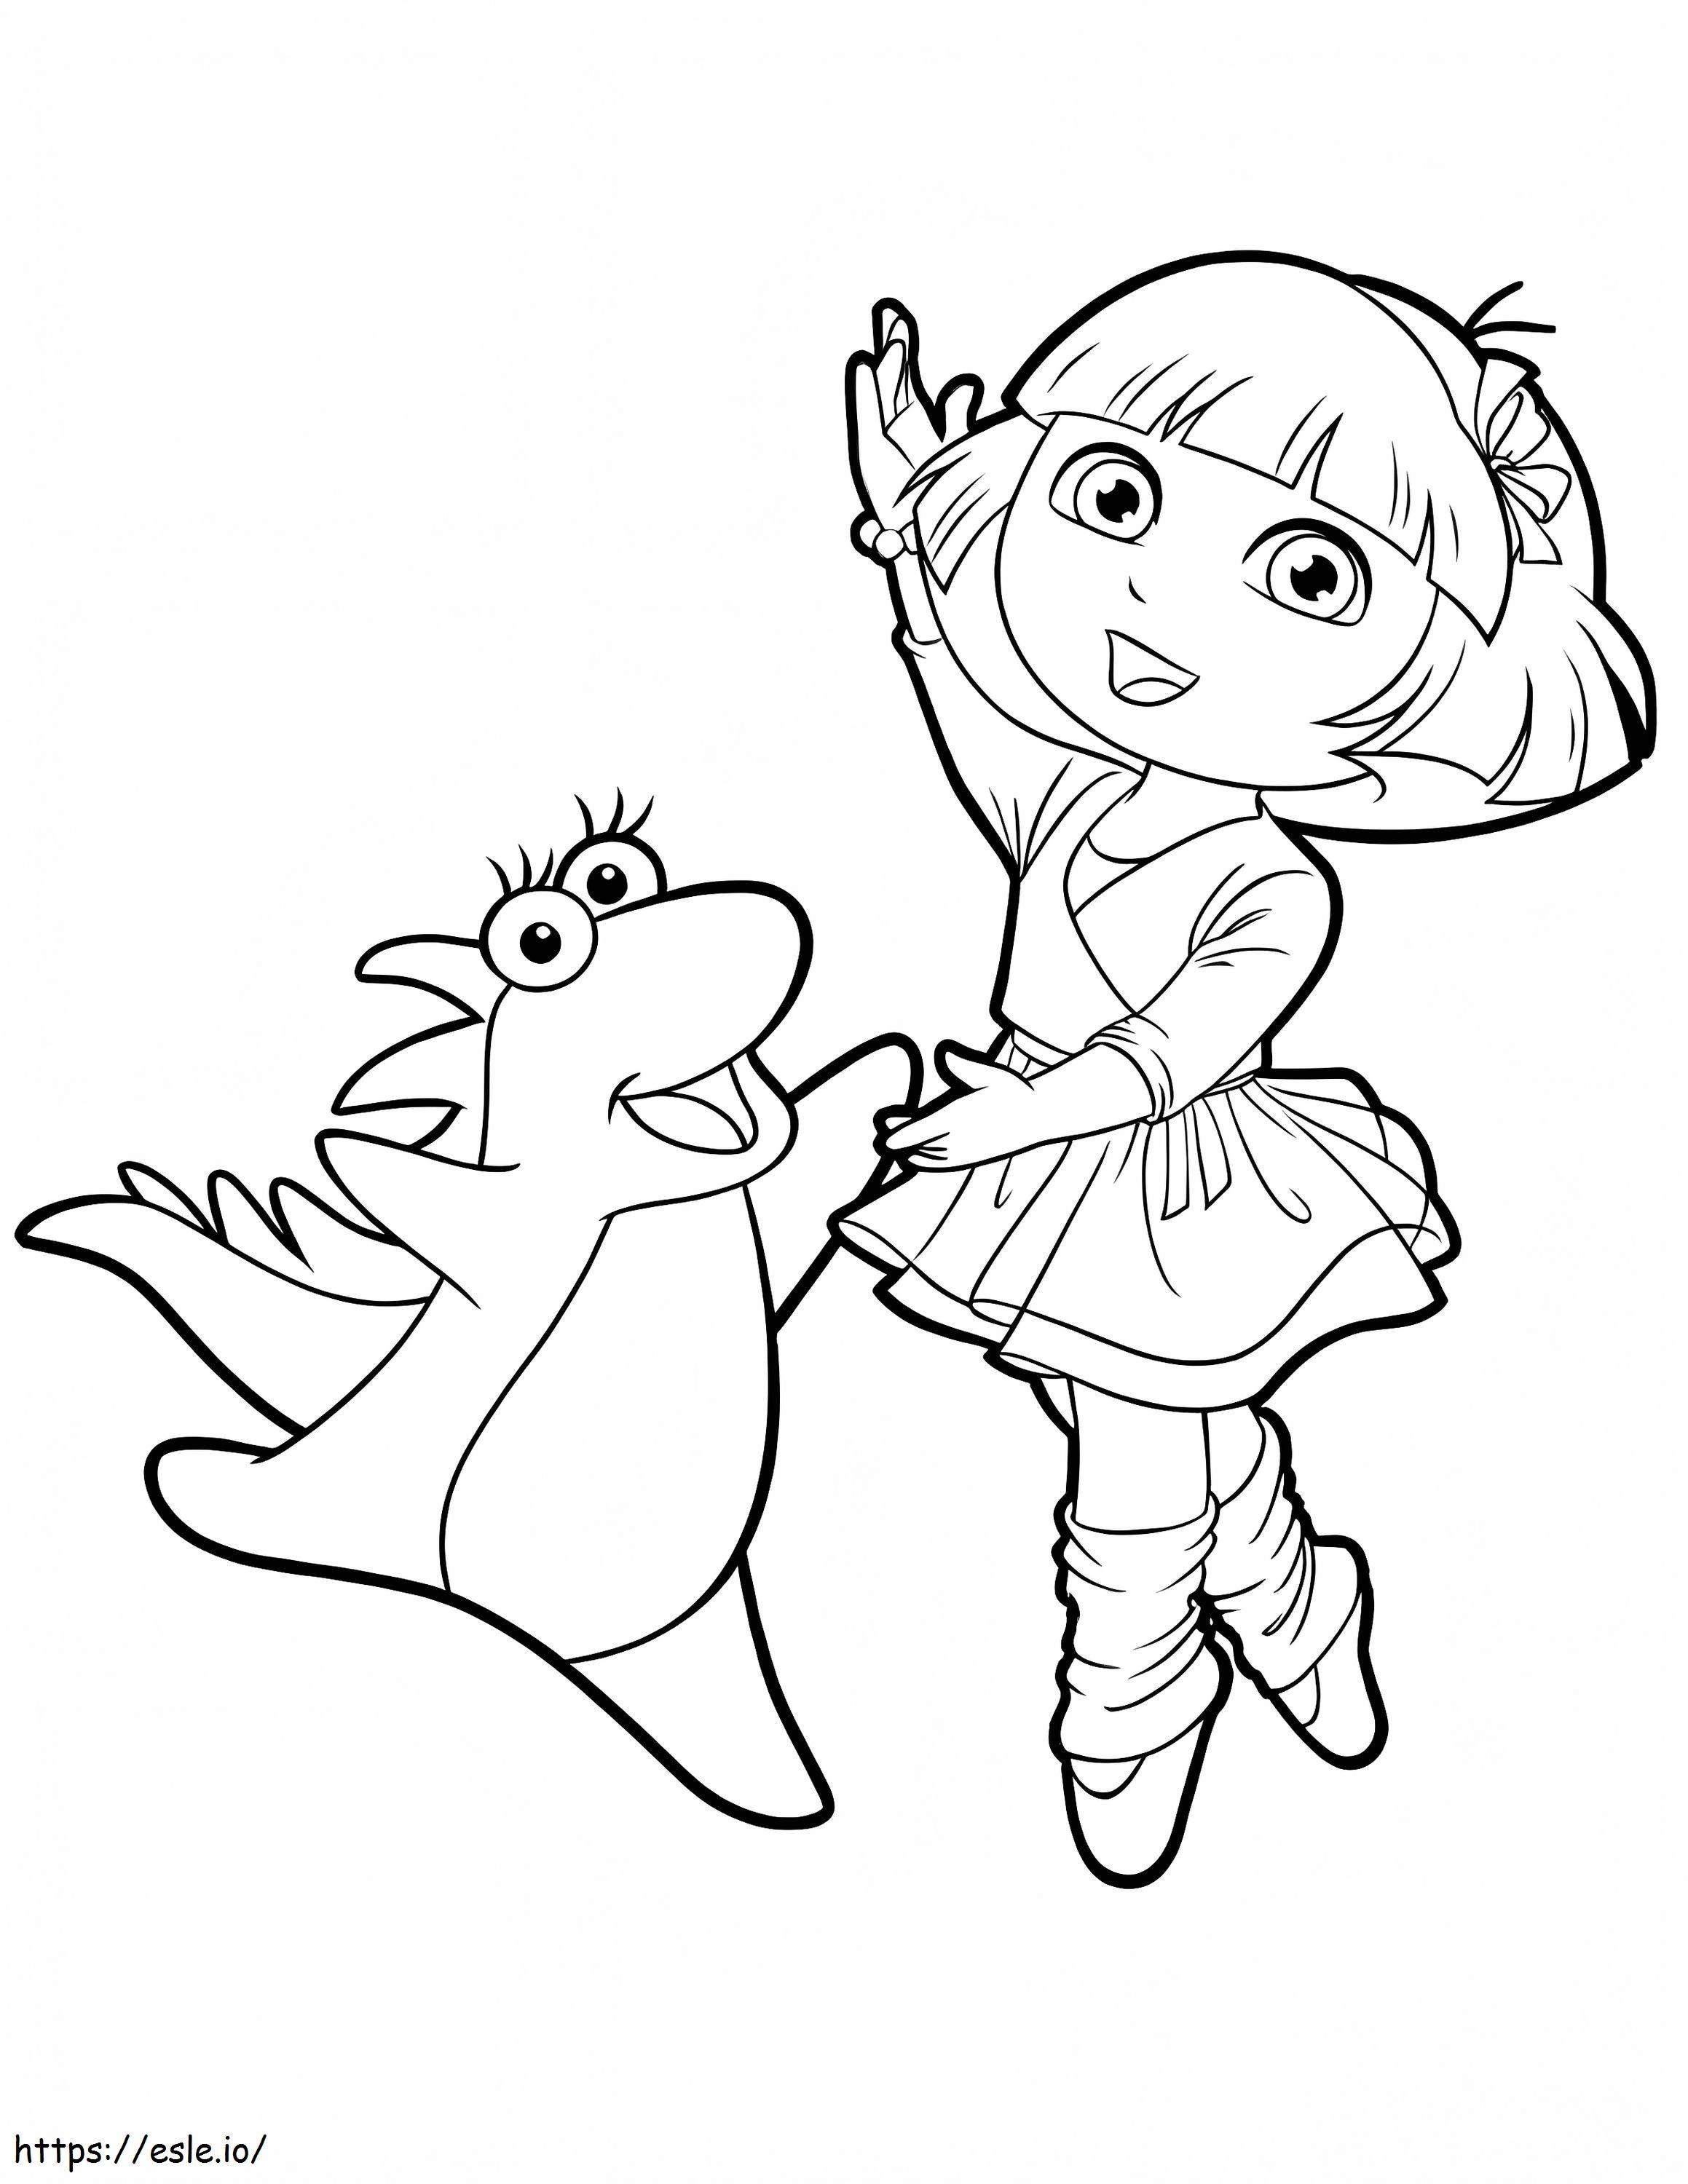 Dora And Isa coloring page